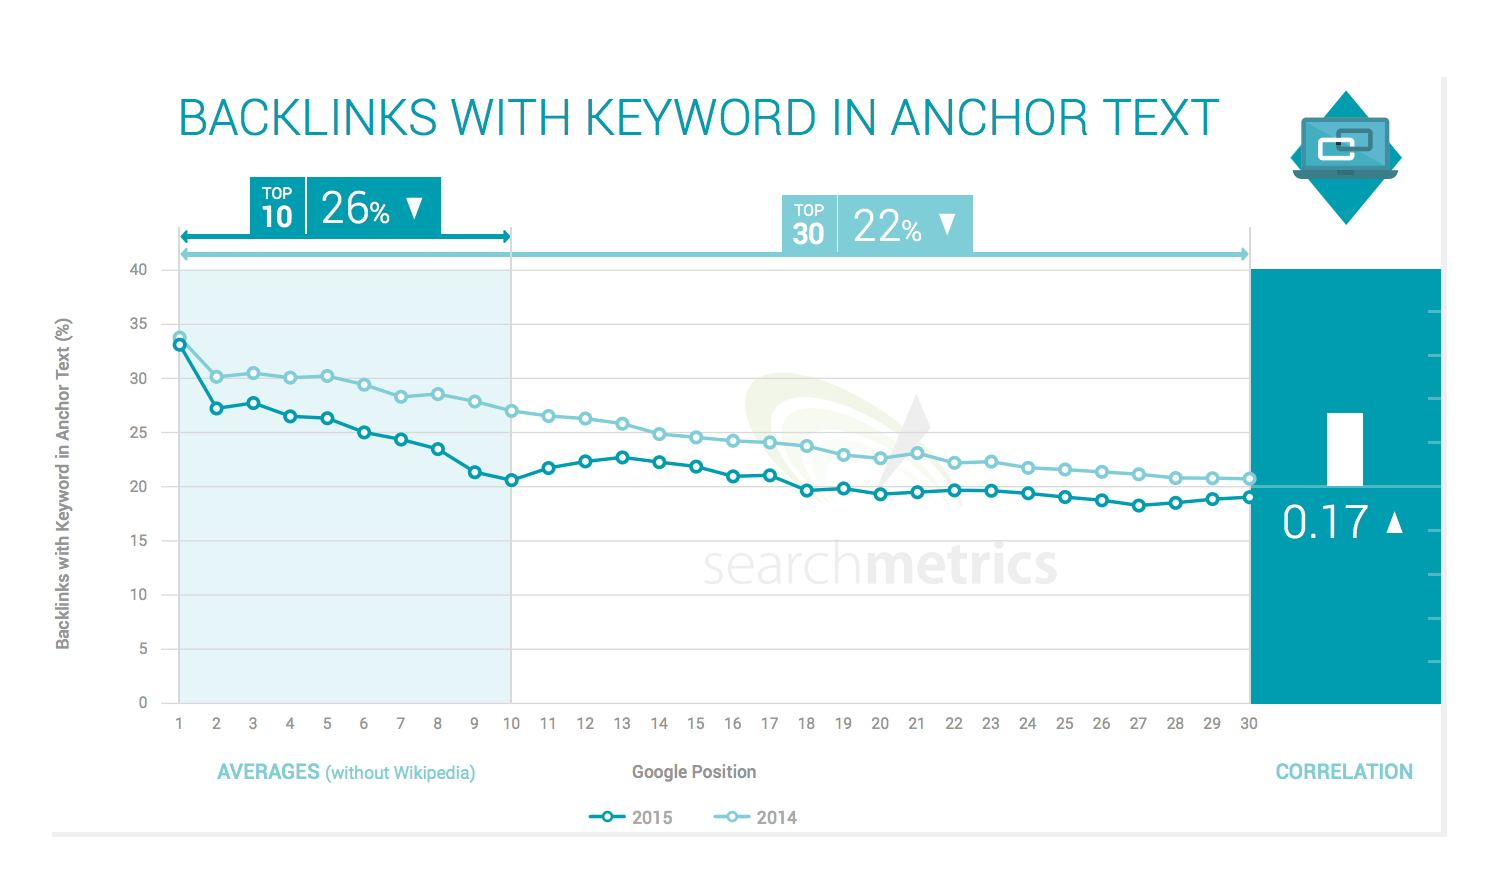 Backlinks with keyword in anchor text saw a drop in usage recently